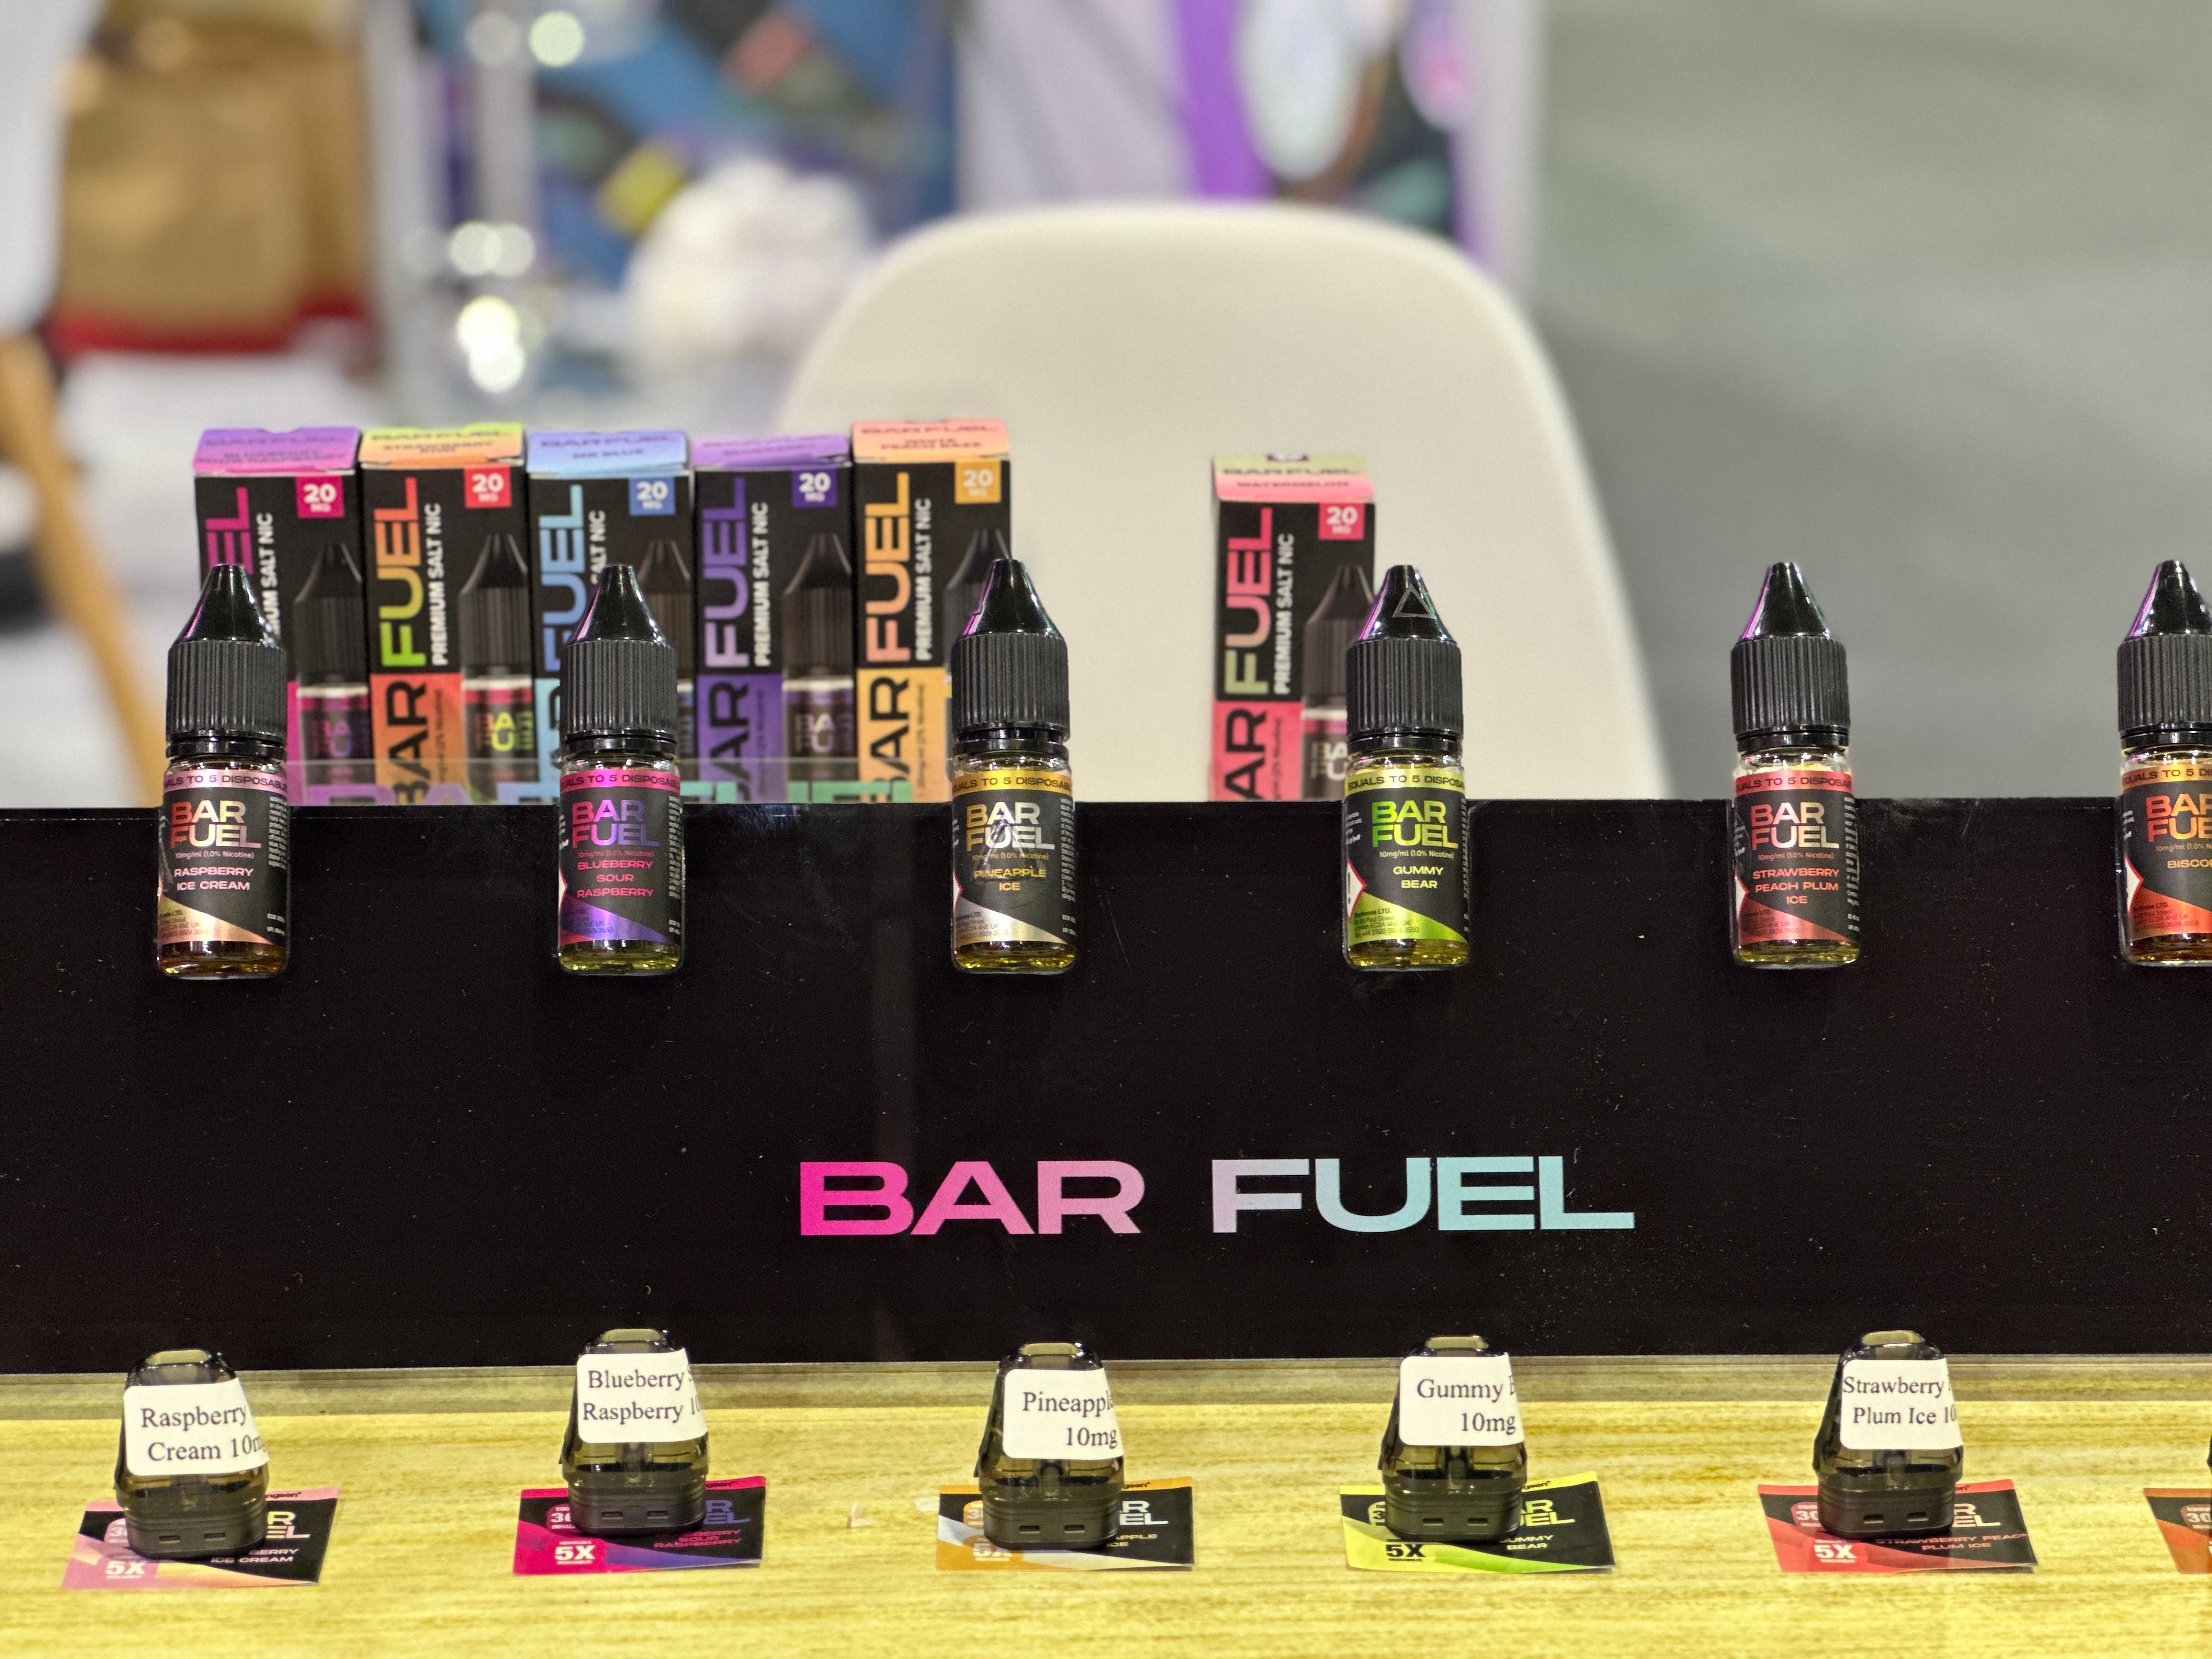 Here's a picture of hangsen's Barfuel line of e-liquid flavors on display at the World vape show.